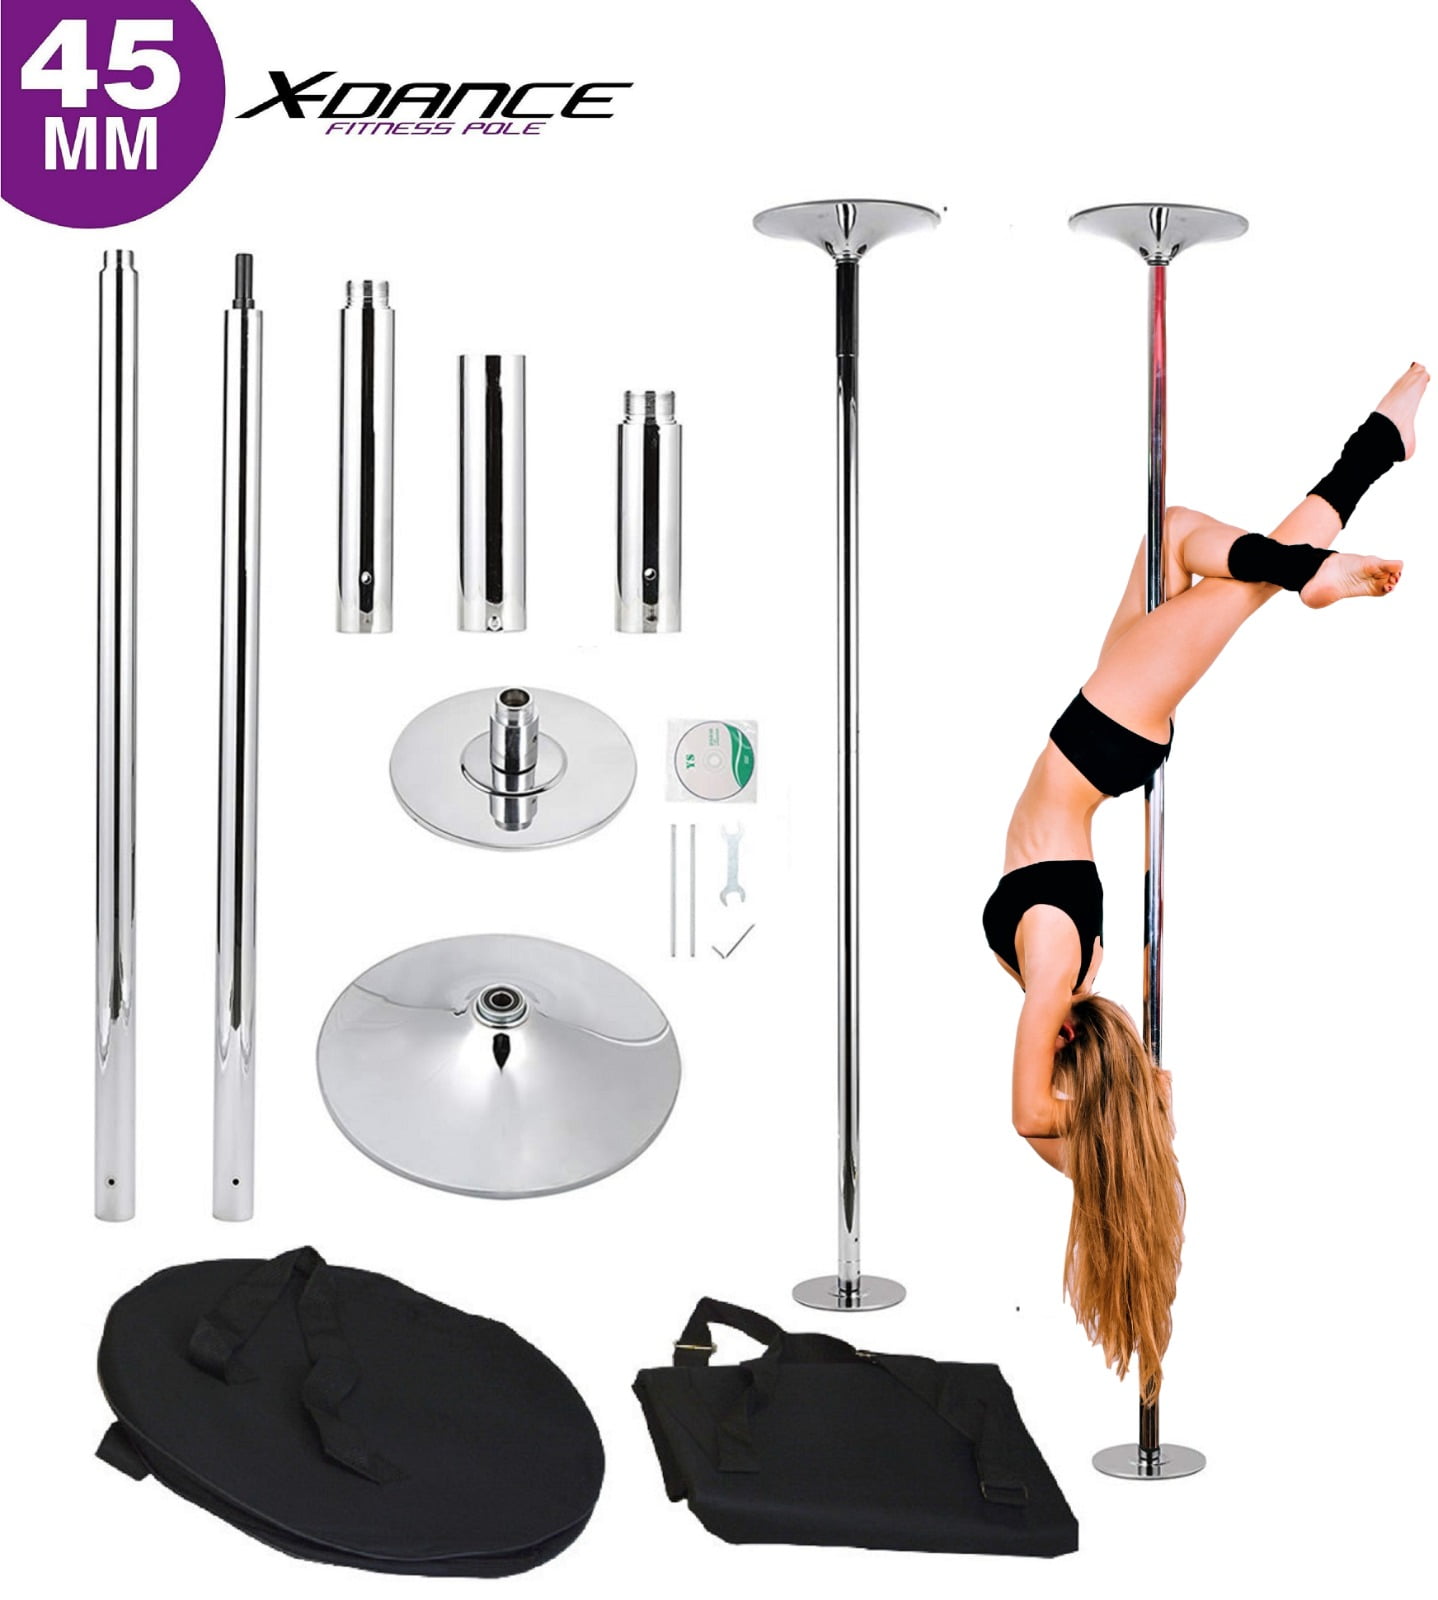 X-Dance Portable 45mm Dancing Pole Kit Fitness Stripper Static Spinning  Dance Exercise Training with Portable Bag Club Home (Chrome)